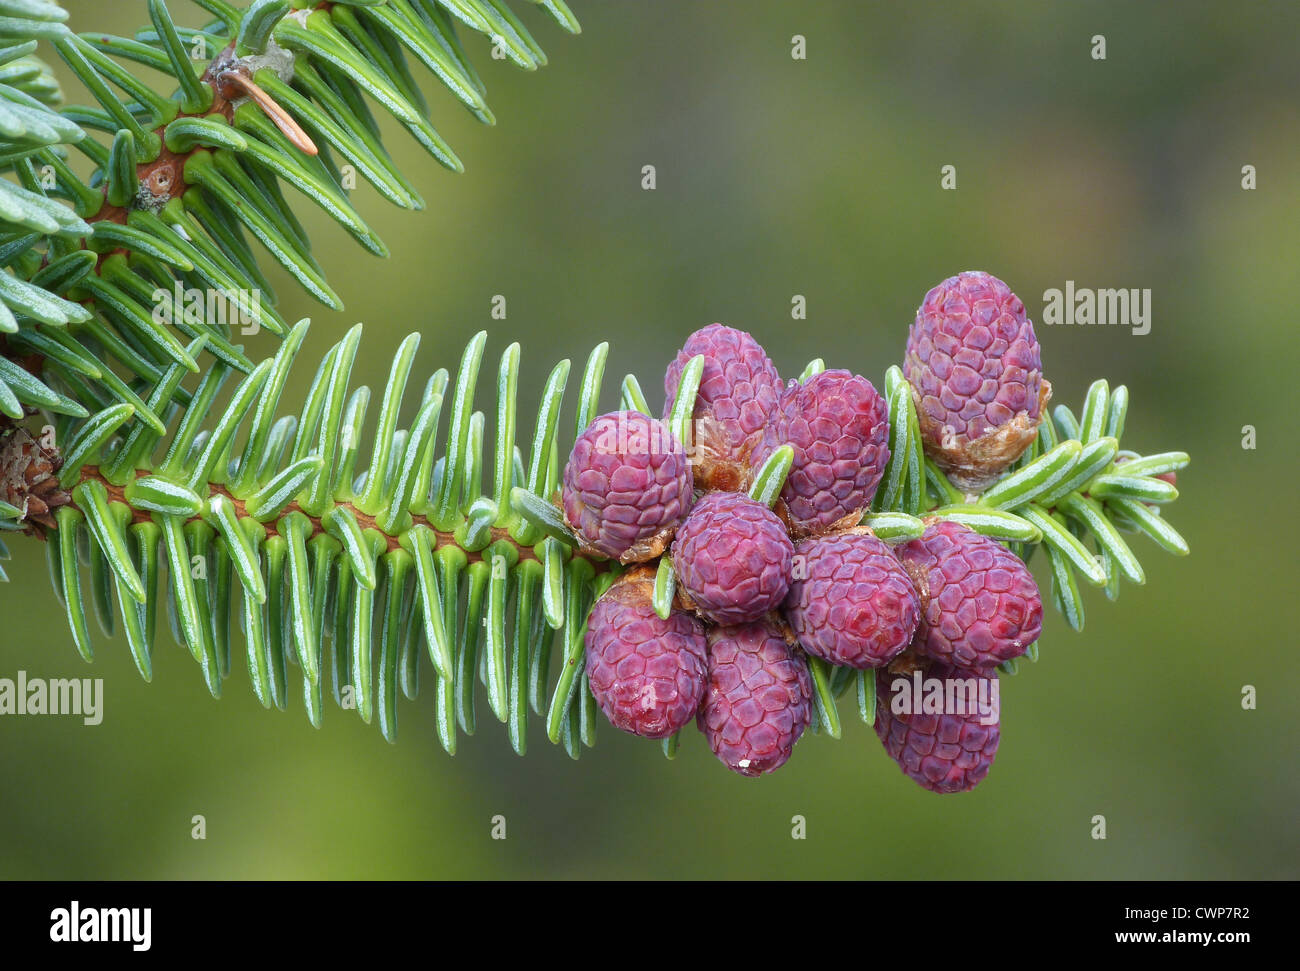 Norway Spruce (Picea abies) close-up of female flower cones, Andalucia, Spain, april Stock Photo